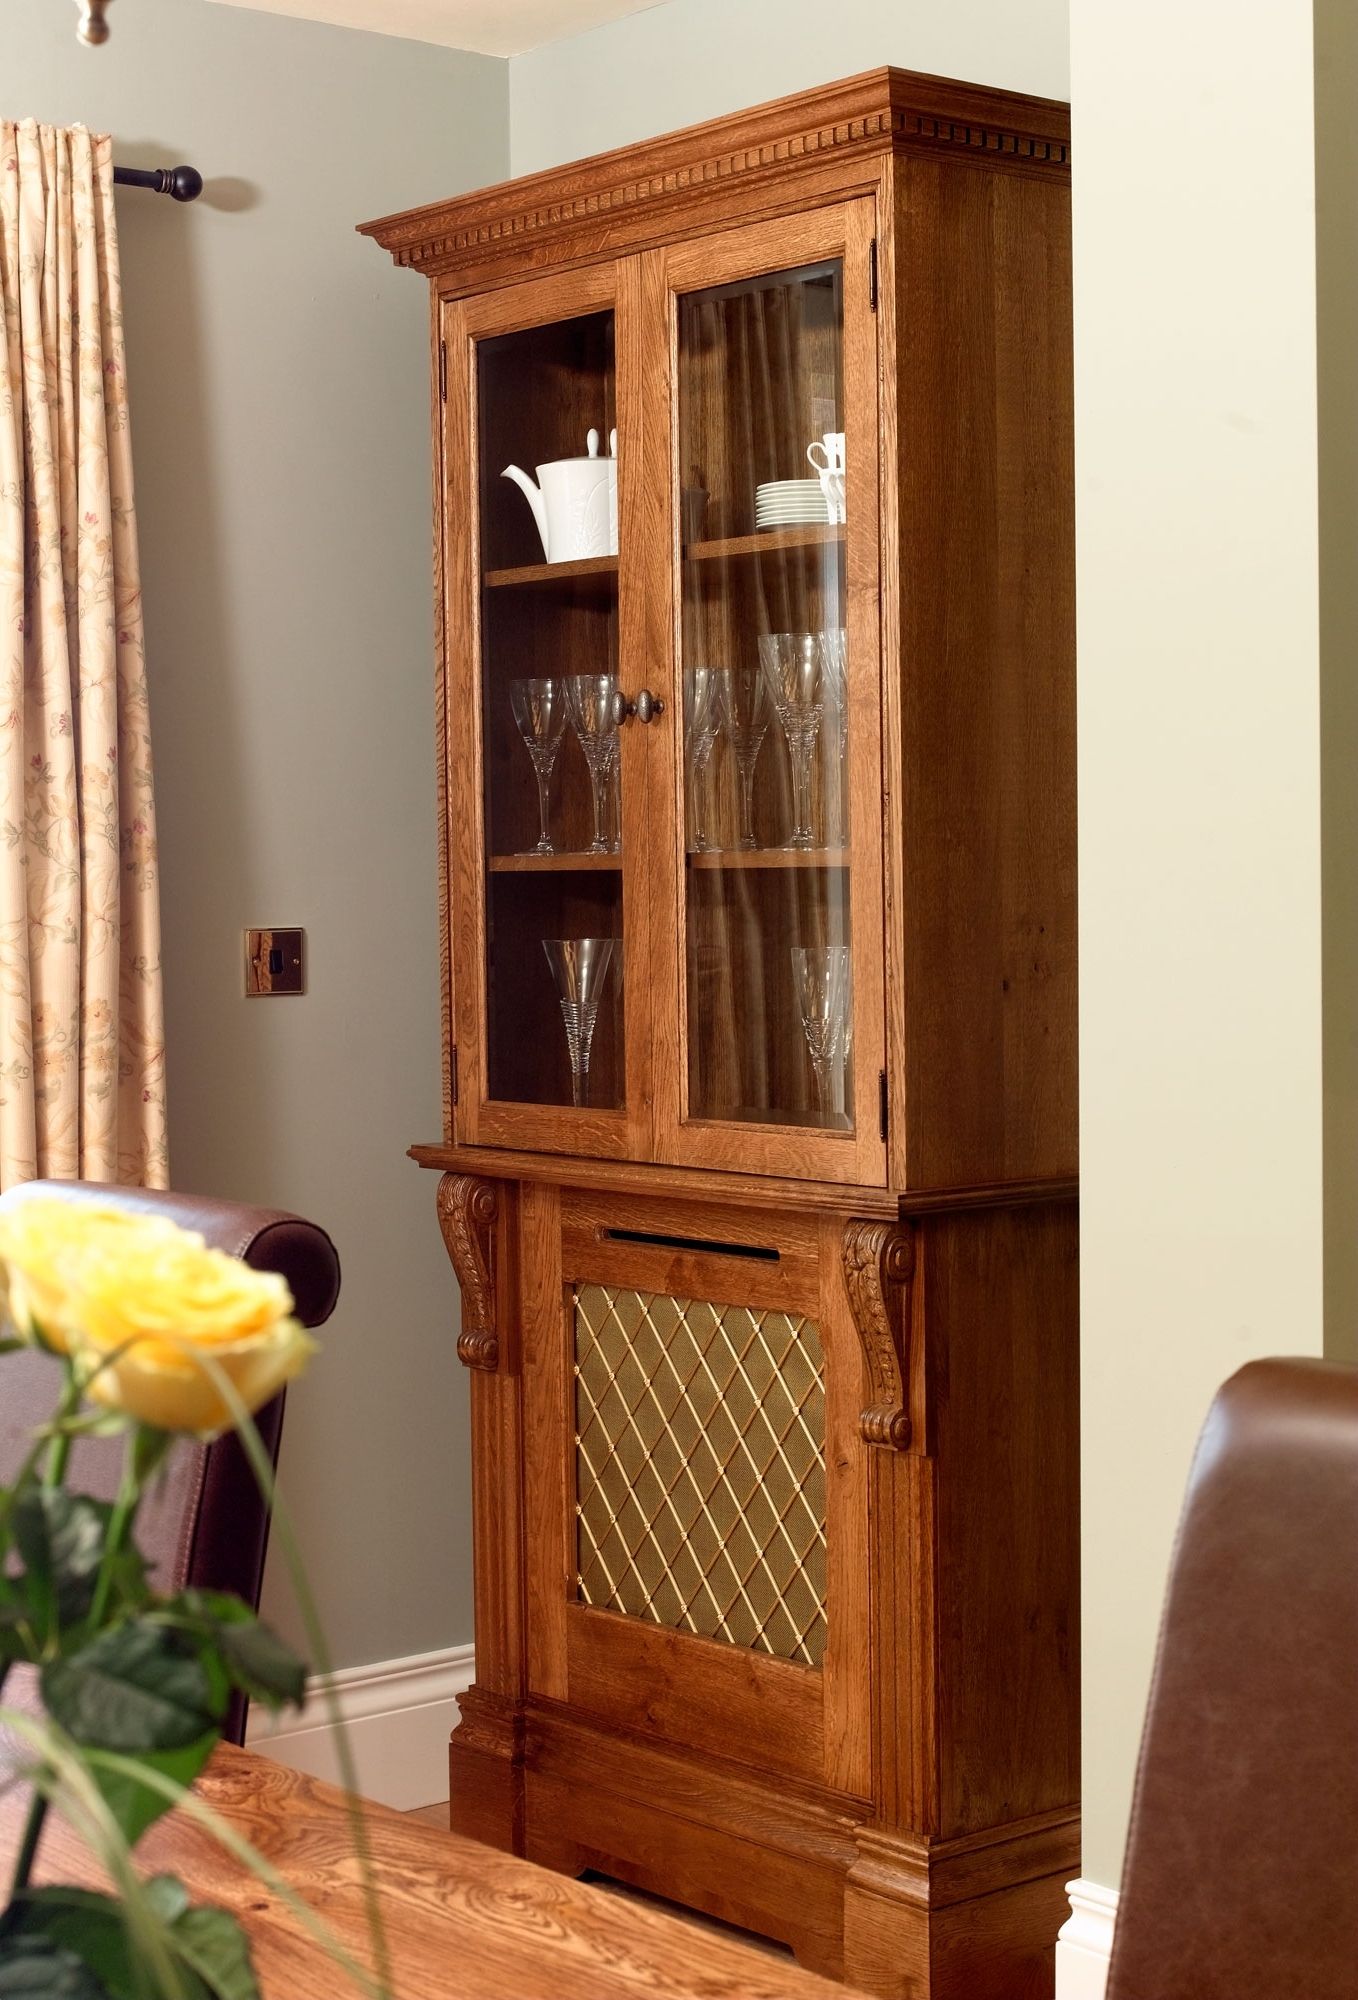 Most Popular Bookcases – Radiator Cabinets – Radiator Covers With Bookcase In Radiator Bookcases Cabinets (View 1 of 15)